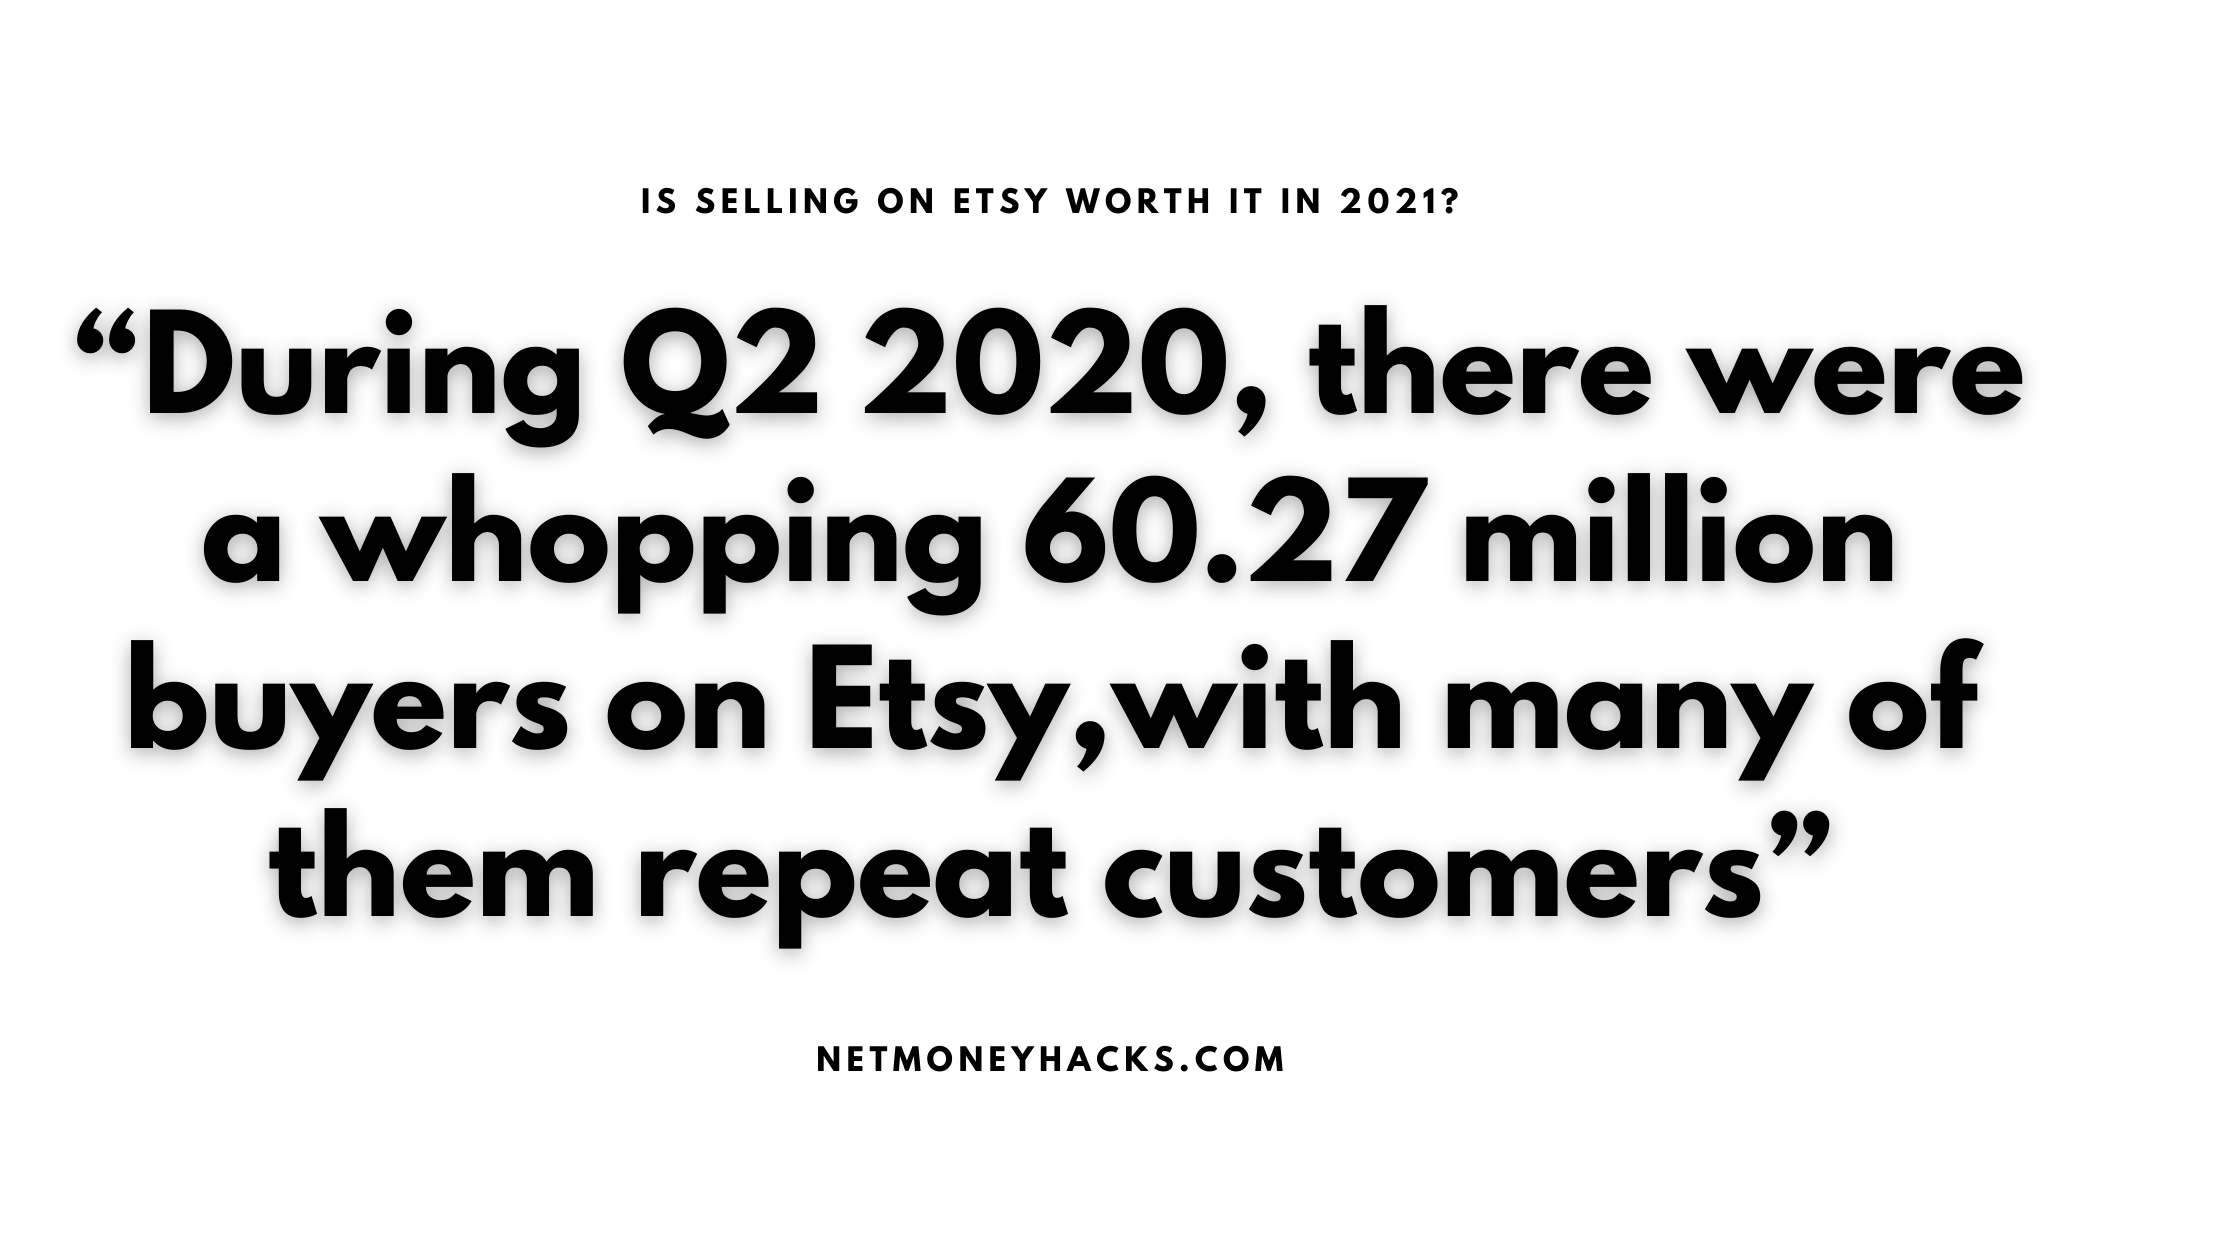 Is Selling on Etsy Worth It in 2021? Answers To 6 Key Questions To Be Absolutely Sure! 1